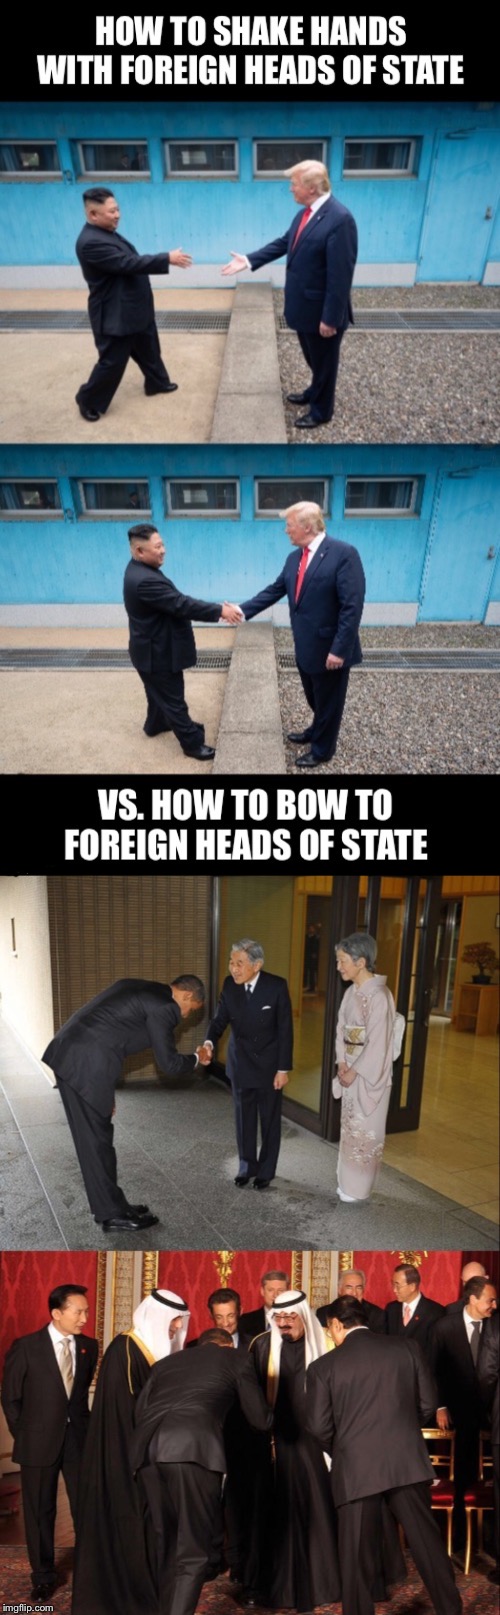 Do you see the difference? | image tagged in trump,obama,kim jong un,saudi king,bow down,handshake | made w/ Imgflip meme maker